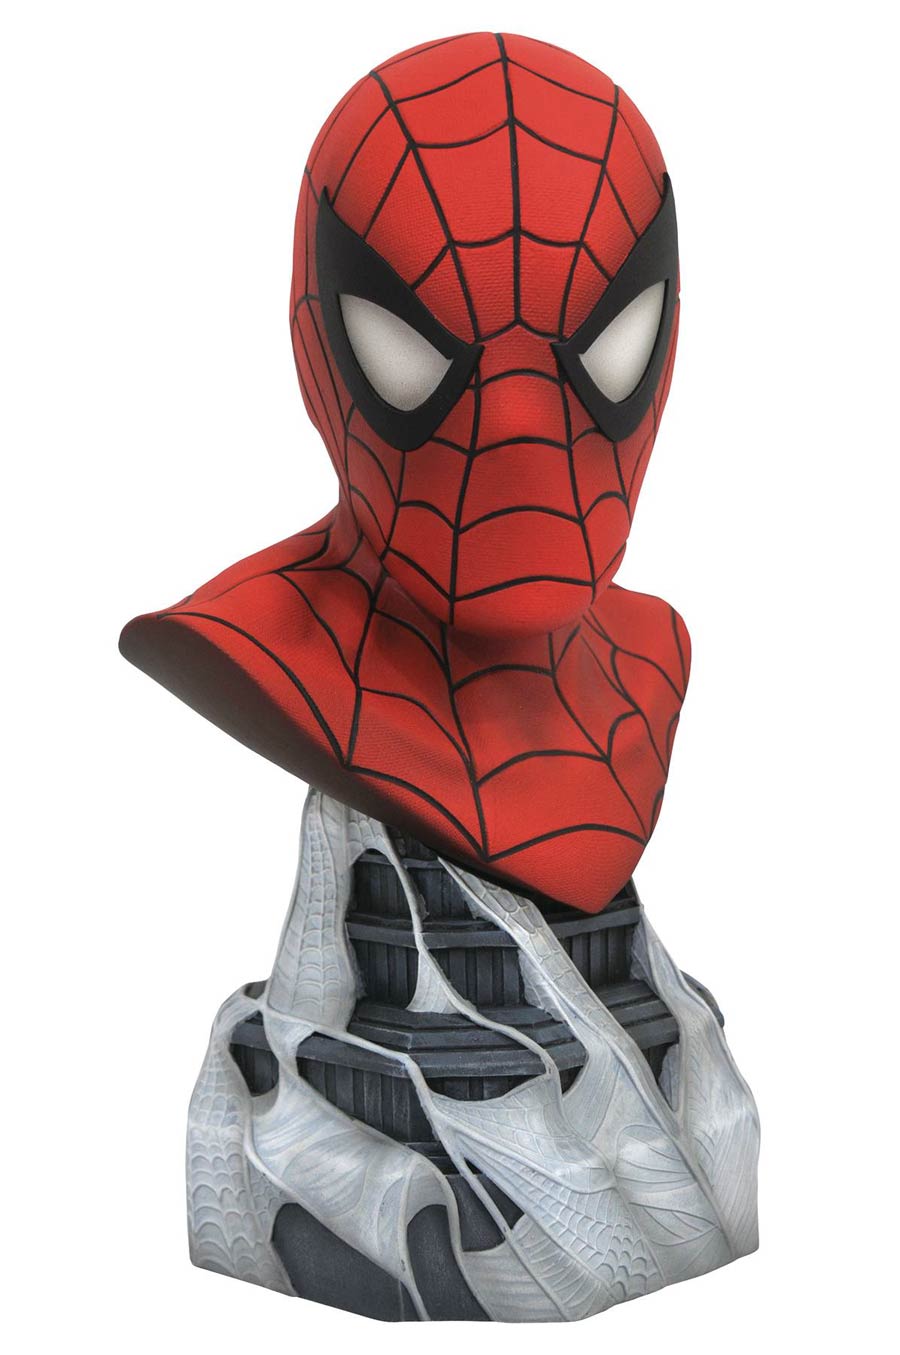 Legends In 3D Marvel Comic Spider-Man 1/2 Scale Resin Bust